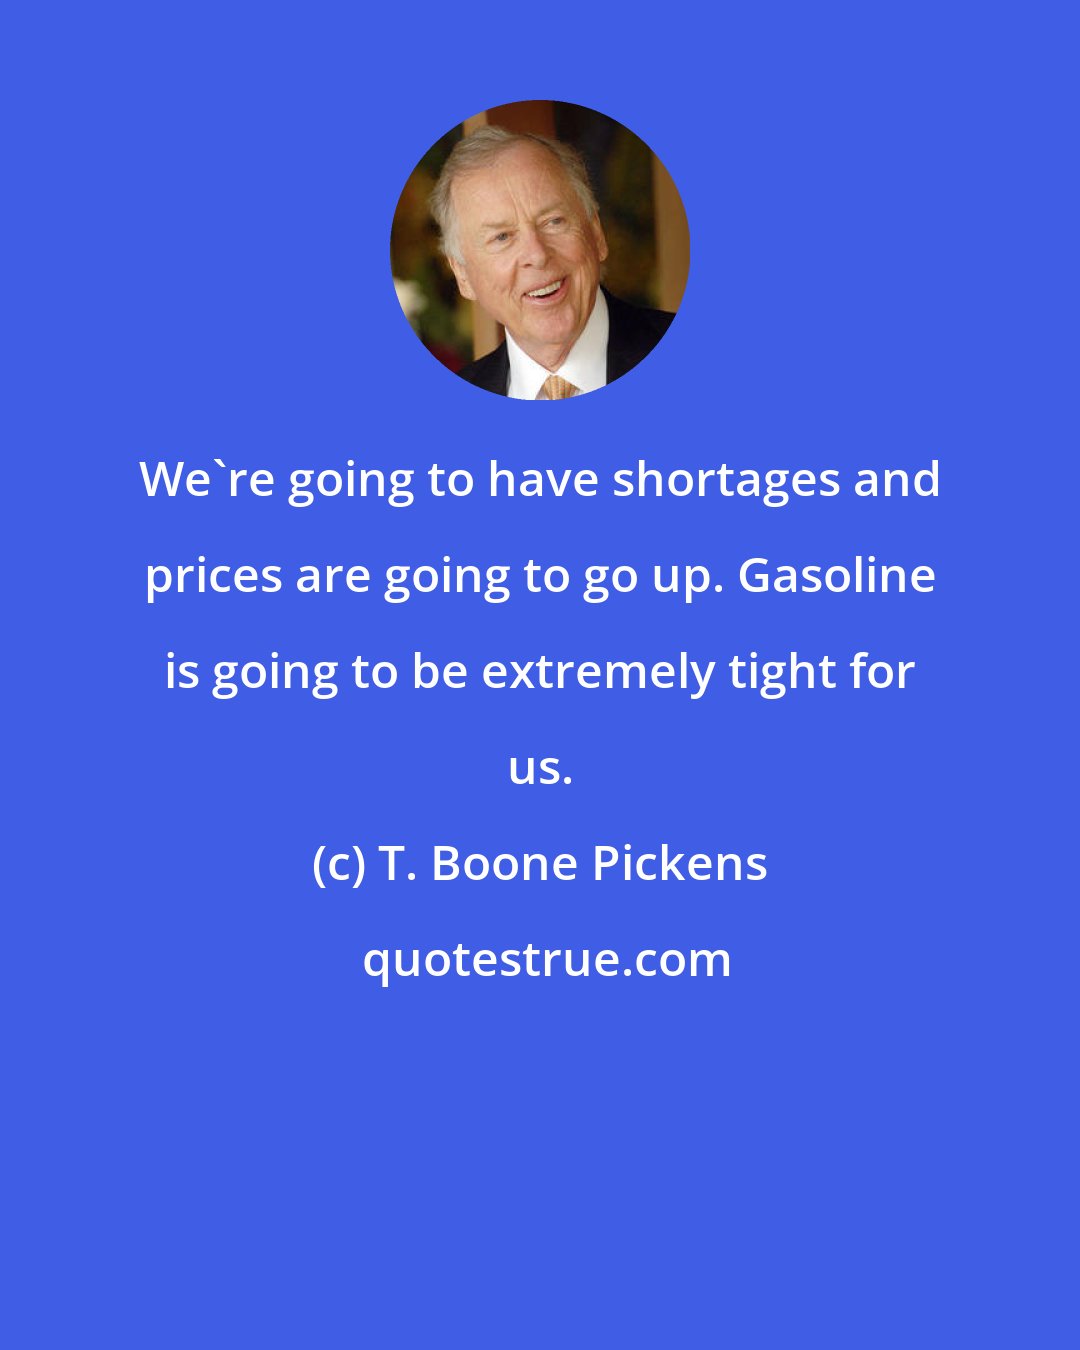 T. Boone Pickens: We're going to have shortages and prices are going to go up. Gasoline is going to be extremely tight for us.